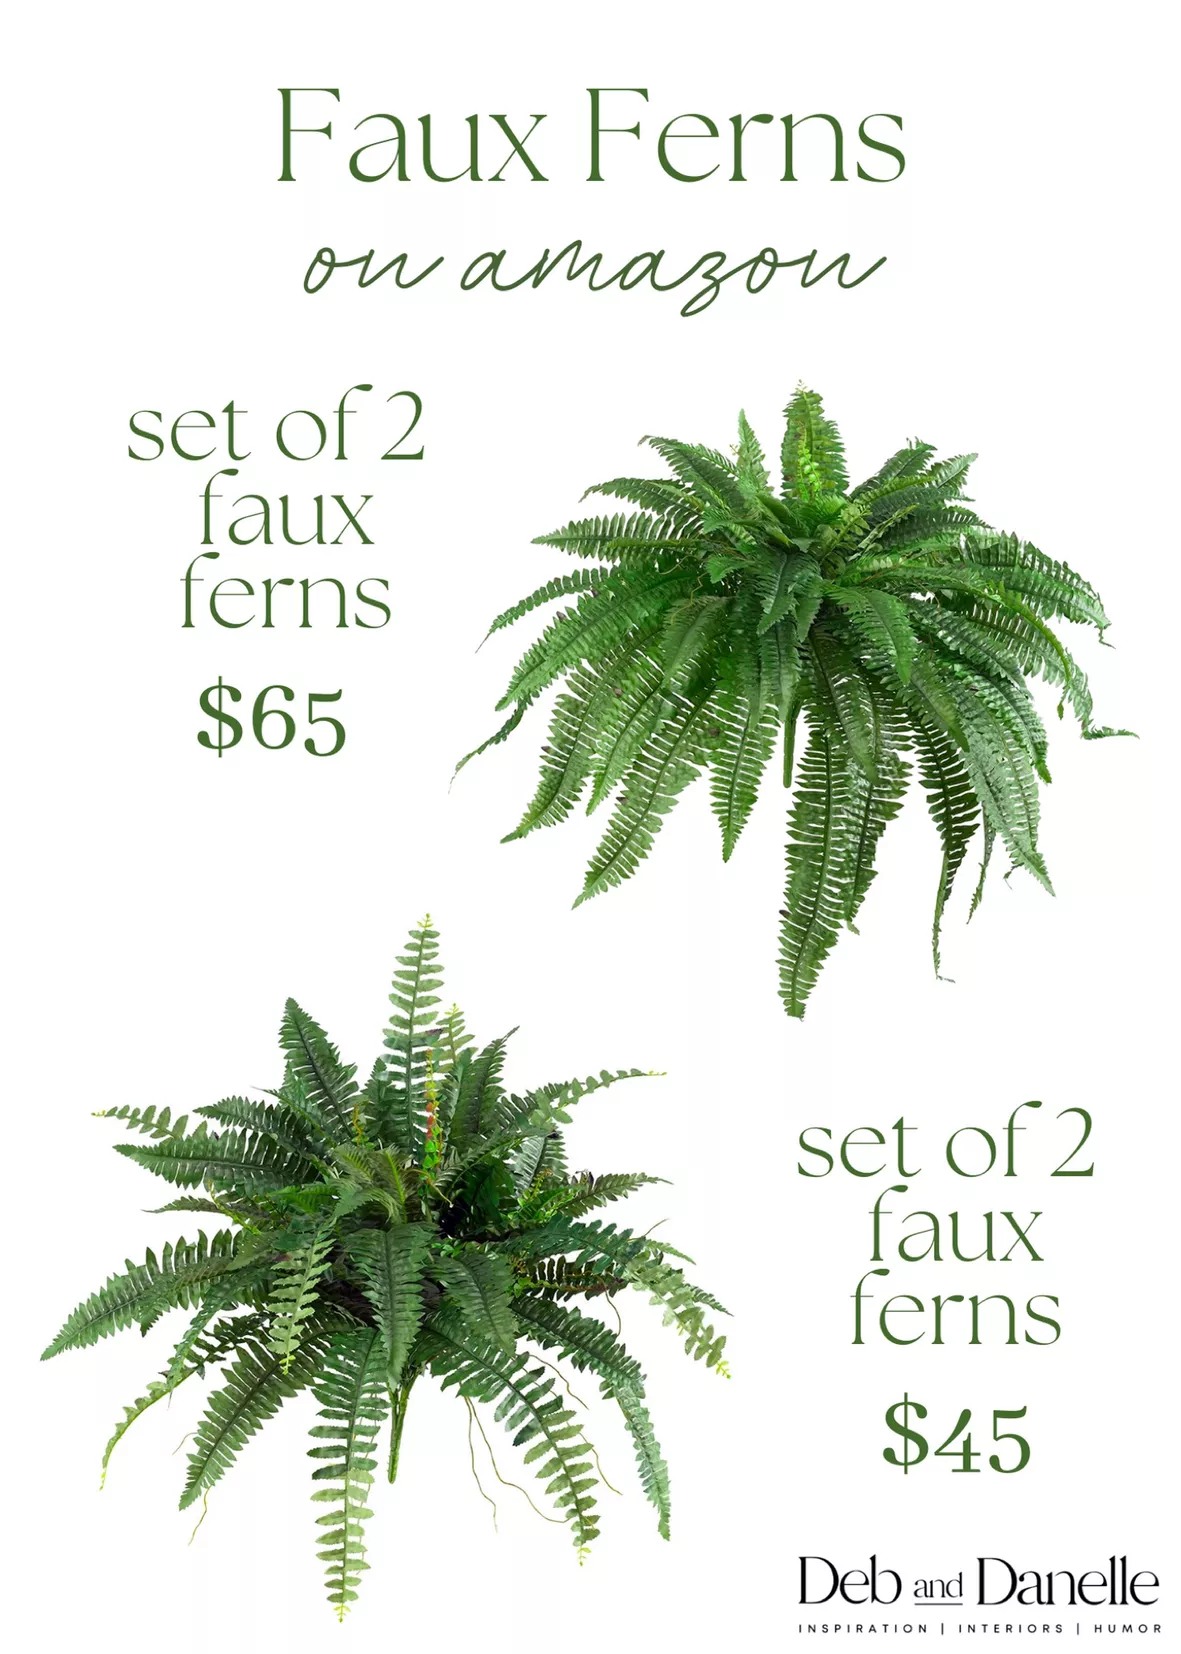 Nearly Natural 22 in. Artificial Green Fern Plant in Decorative Planter